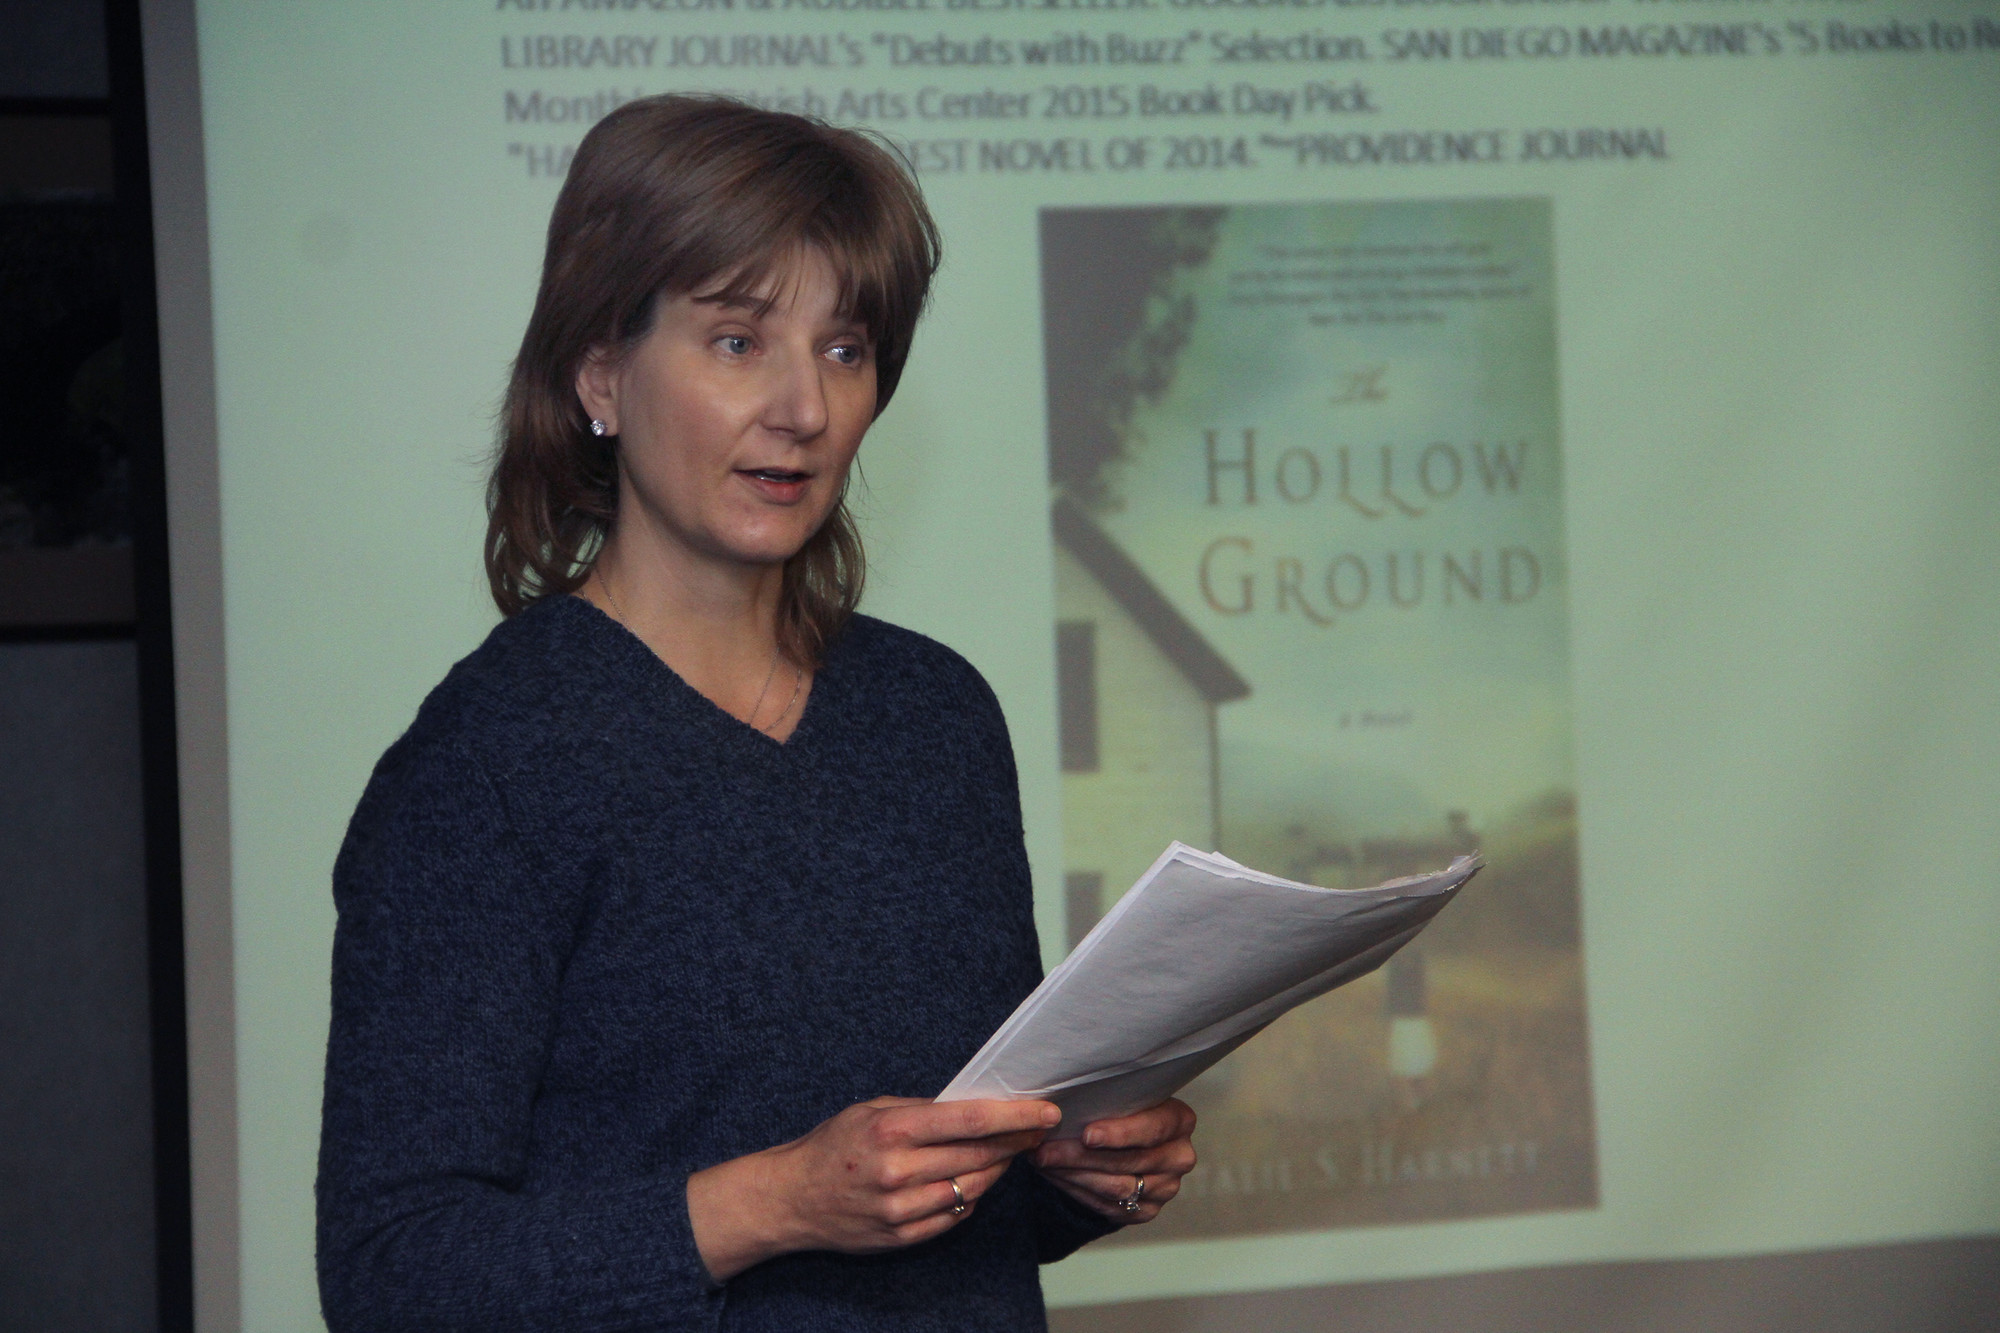 Natalie Harnett read excerpts from her book.